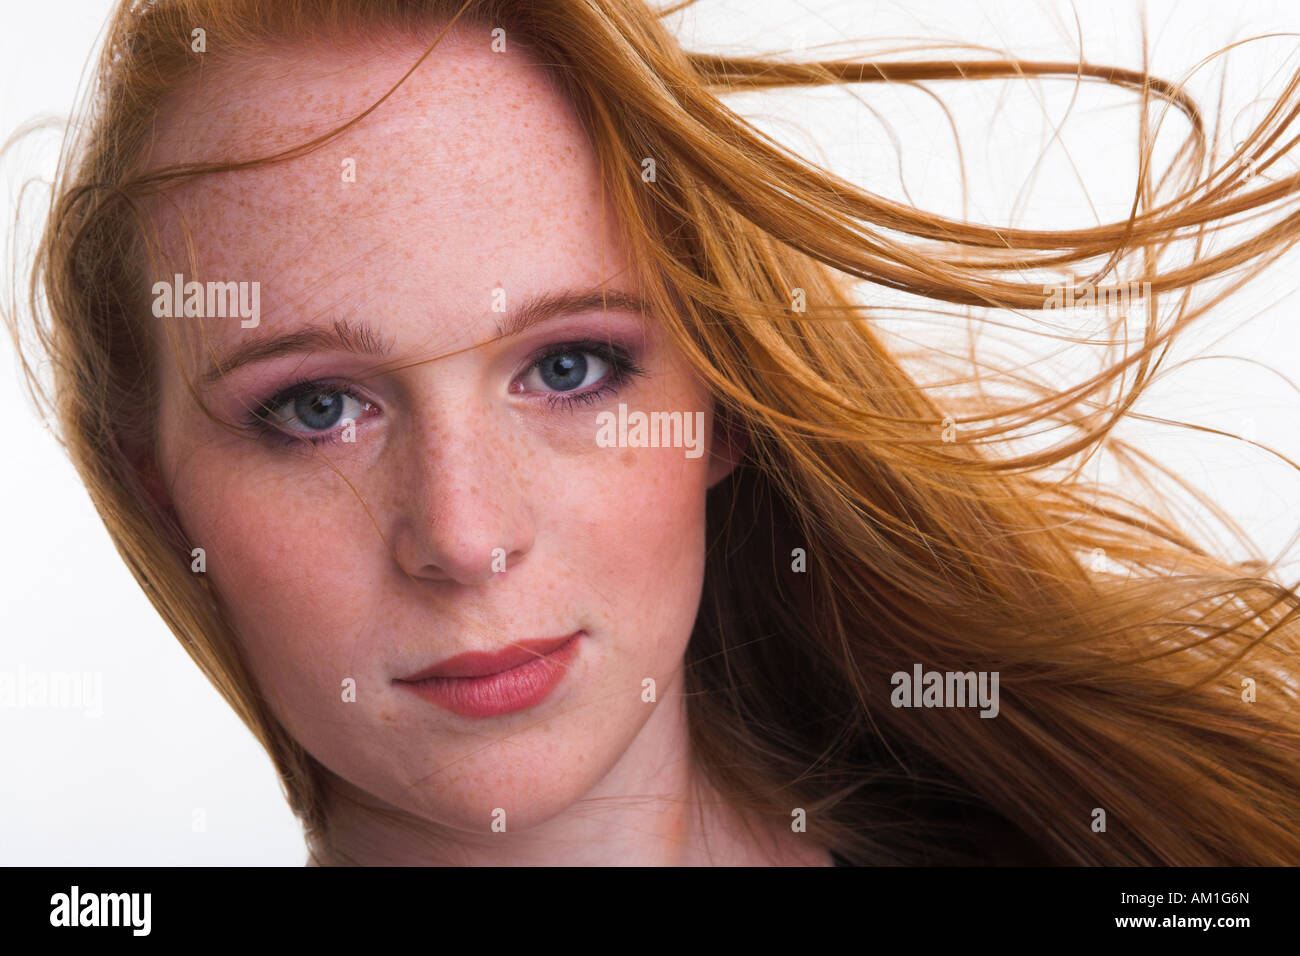 Ortrait of a girl with moving red hair and freckles Stock Photo